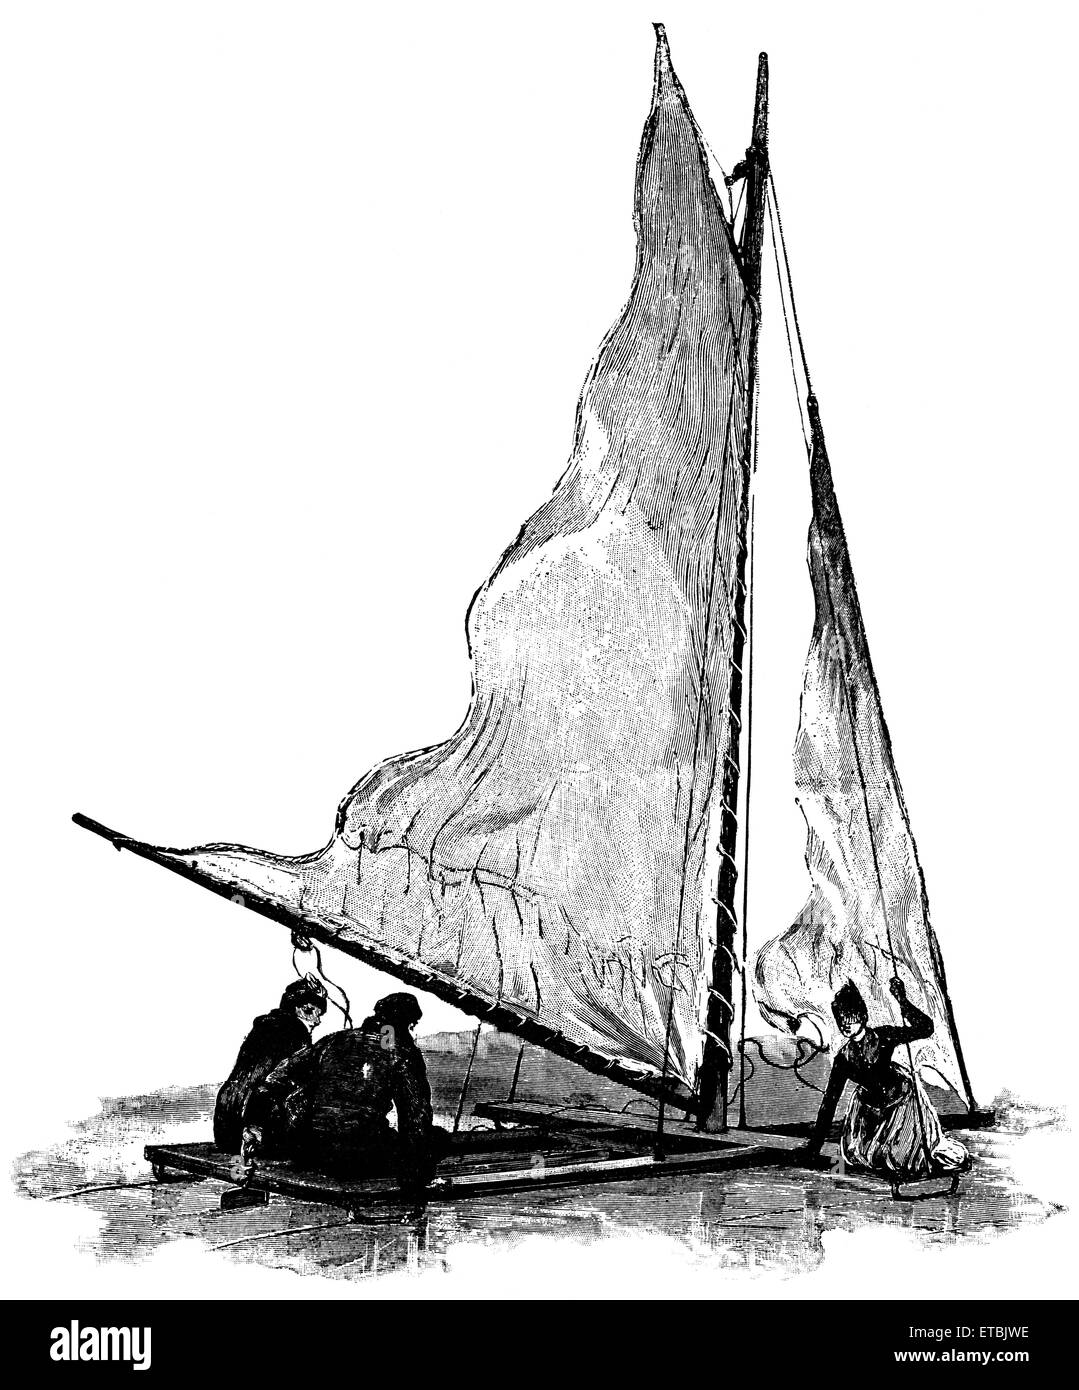 Ice Boat on Loch Cobbinshaw, Scotland, 'Classical Portfolio of Primitive Carriers', by Marshall M. Kirman, World Railway Publ. Co., Illustration, 1895 Stock Photo